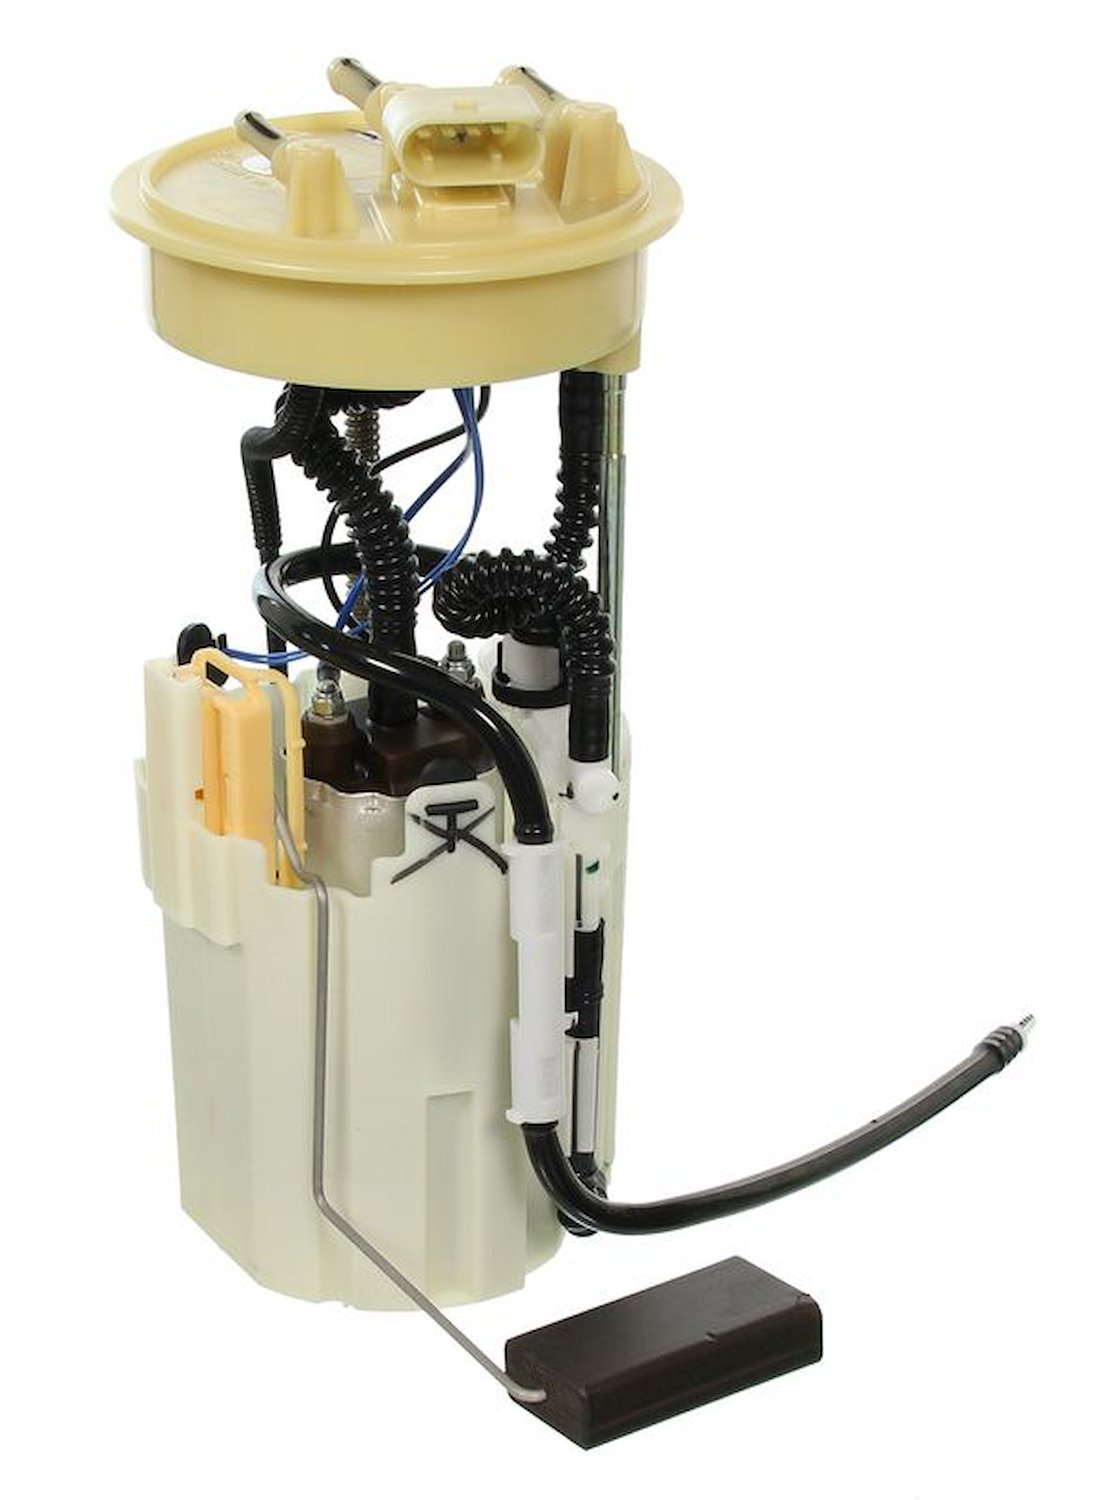 OE Chrysler/Dodge/Jeep Replacement Electric Fuel Pump Module Assembly for 2003-2006 Sprinter 2500/3500